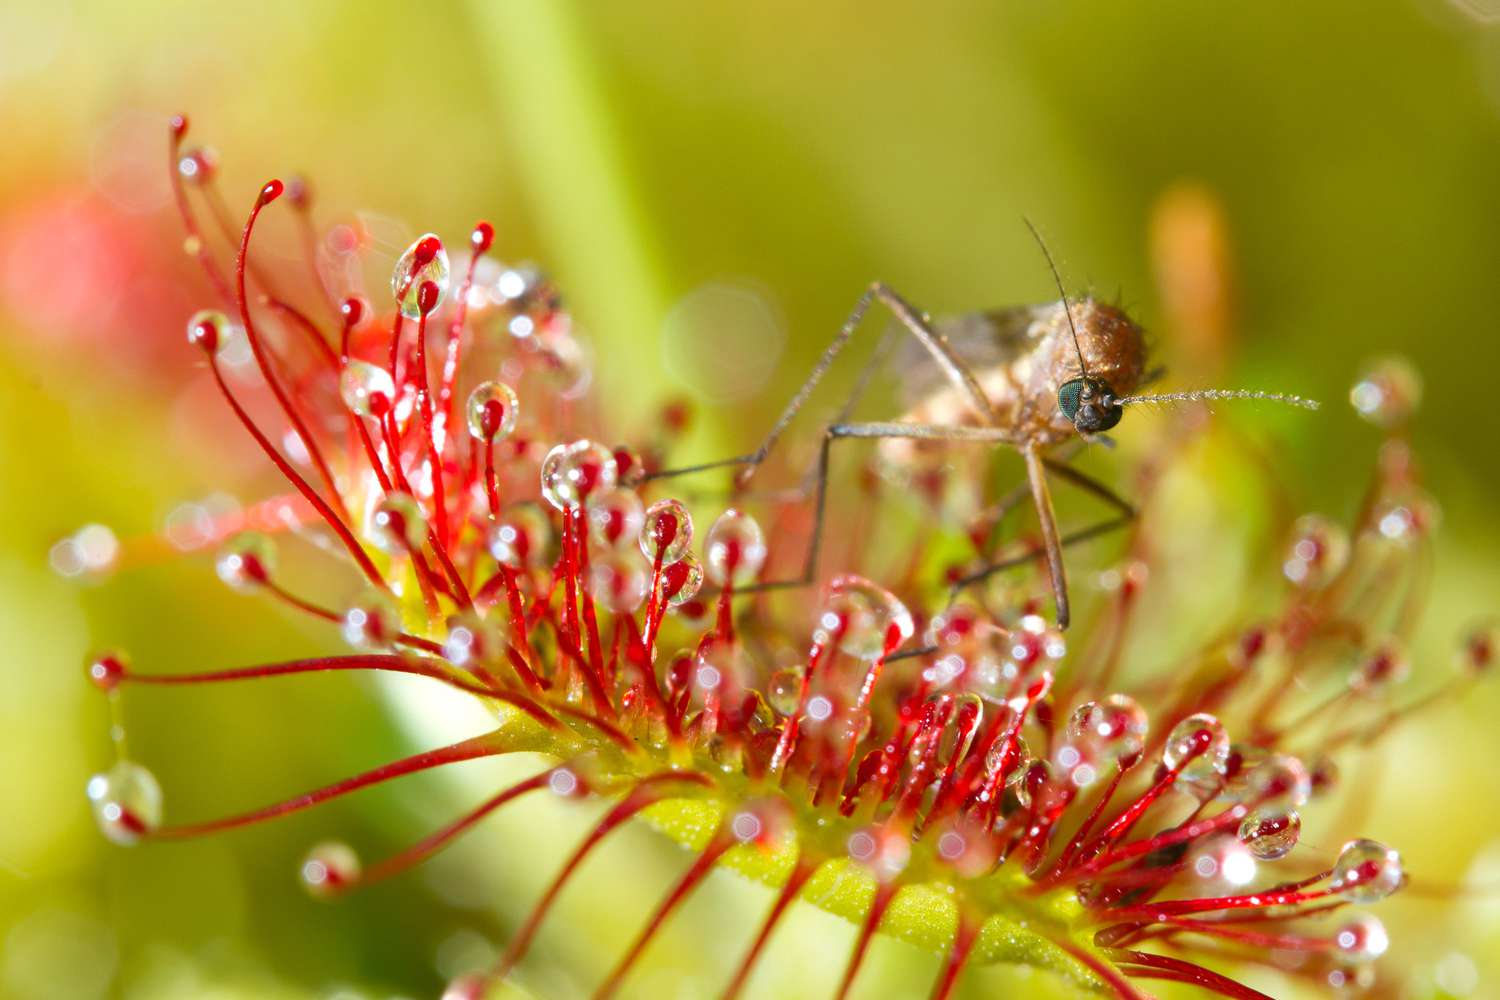 Bug caught in a red sundew plant.